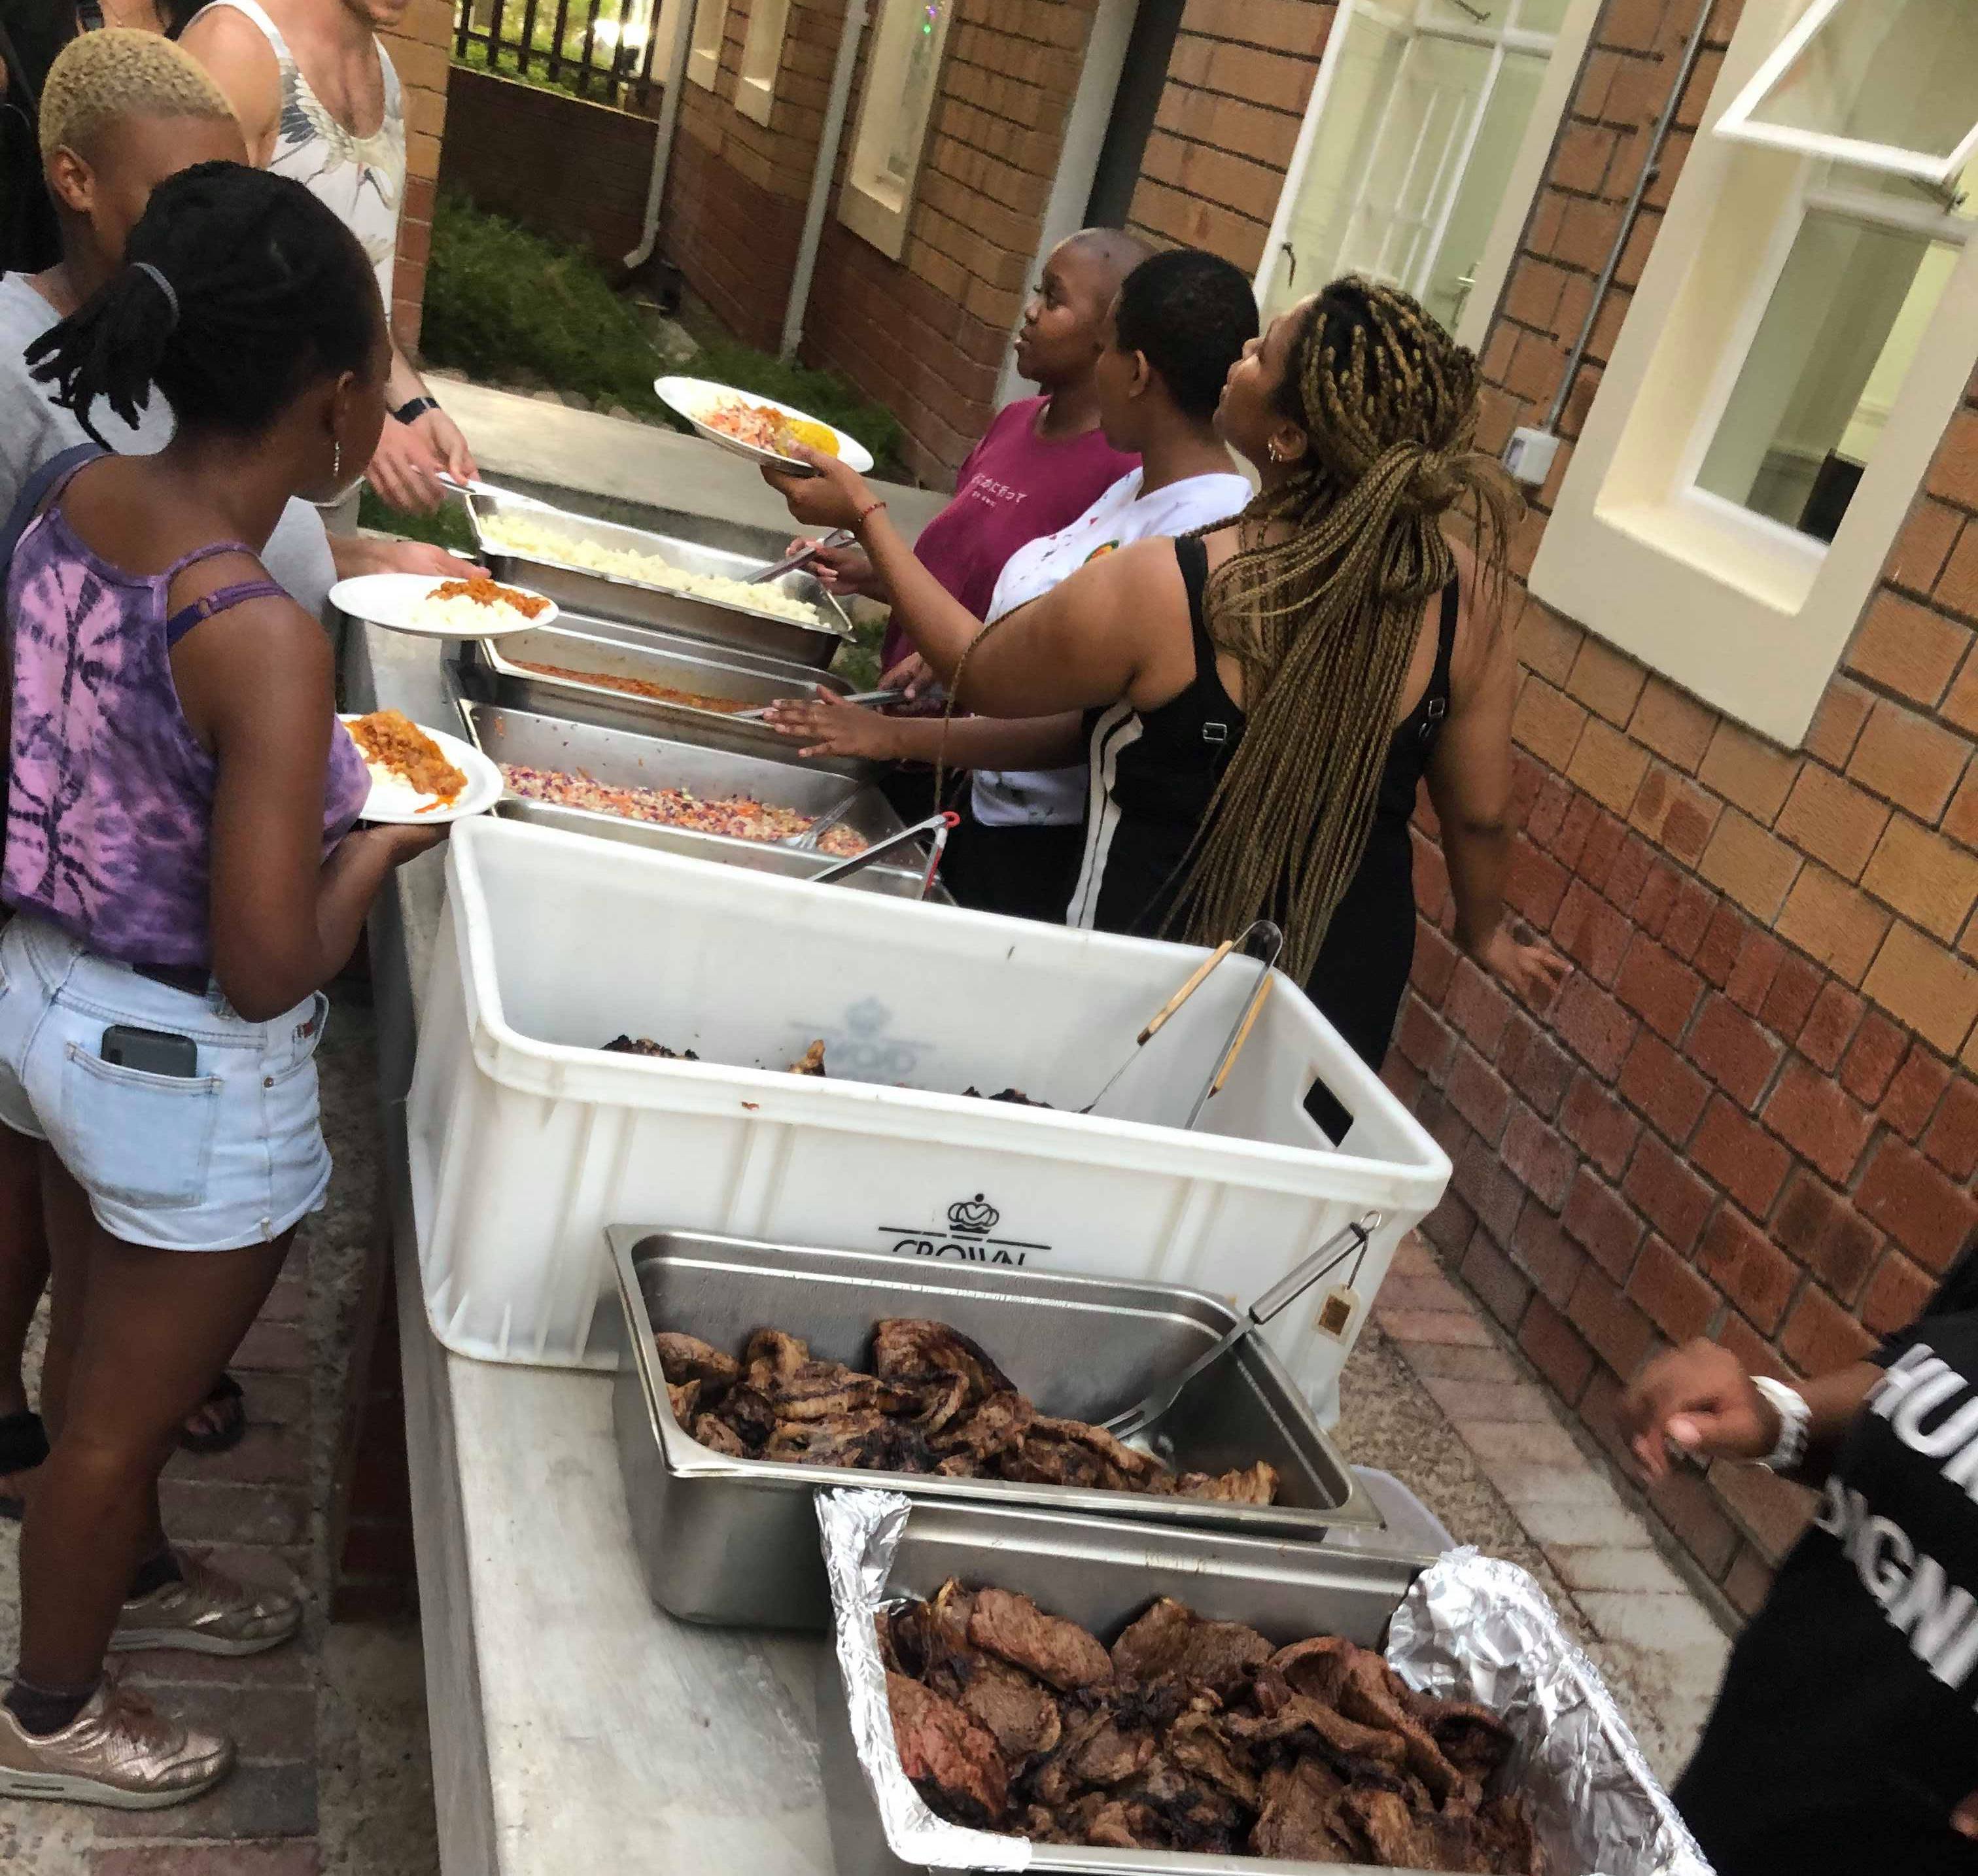 Braai (South African barbecue) 